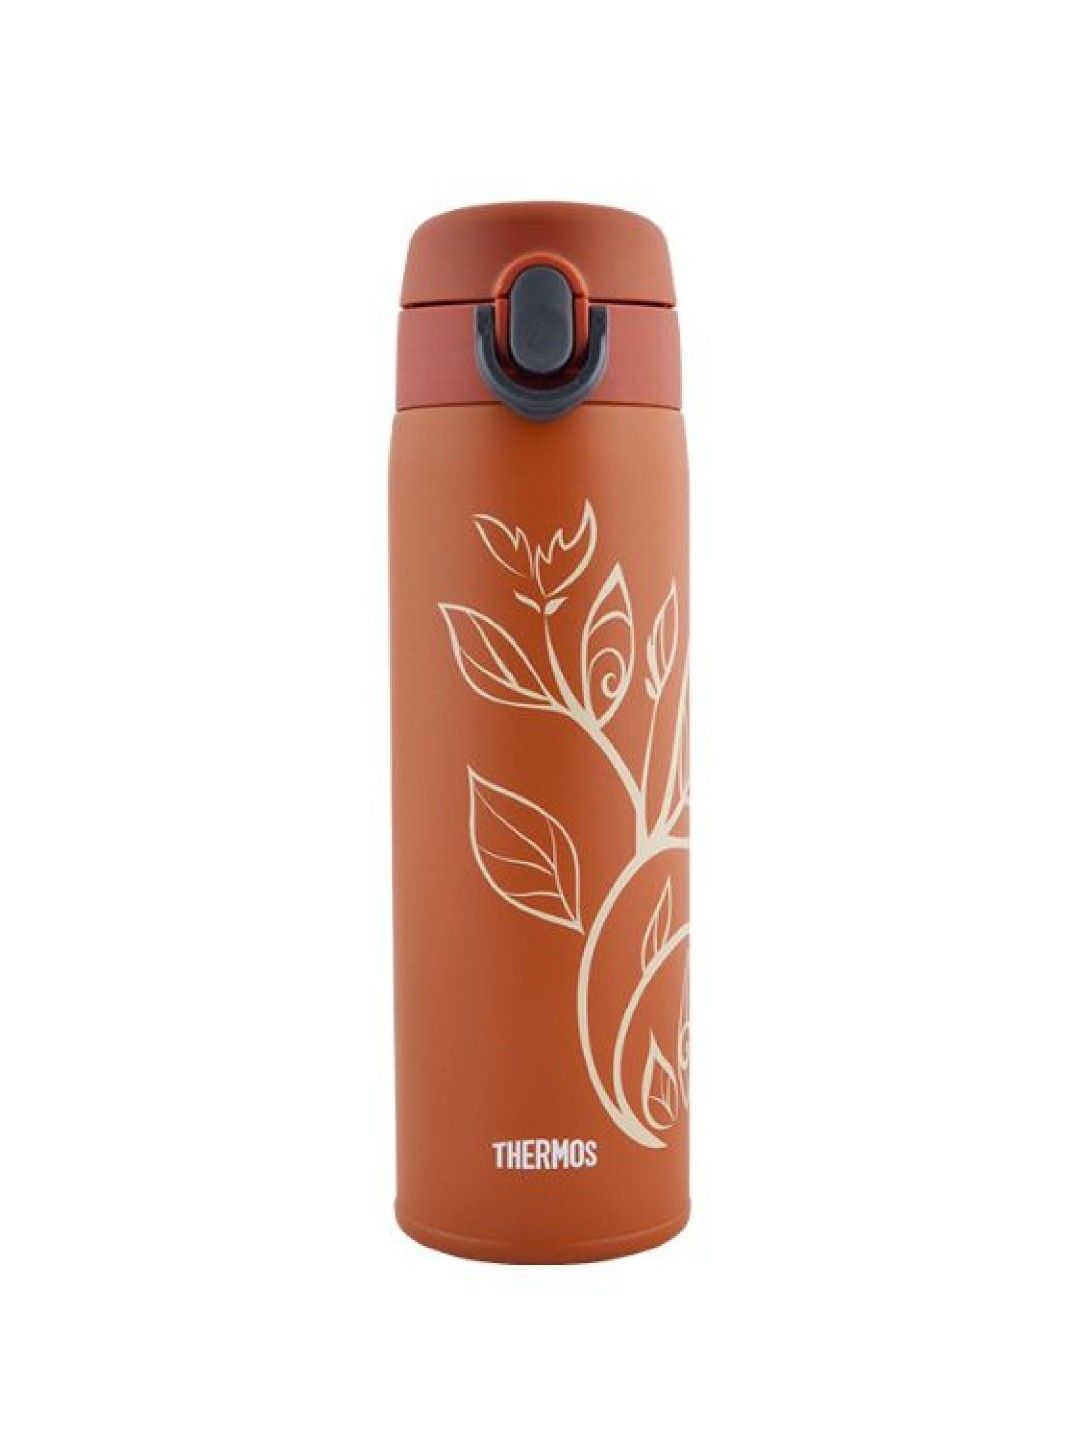 Thermos JNX-500P Insulated Drinking One Push Tumbler - Save the Earth/Orange (500ml)